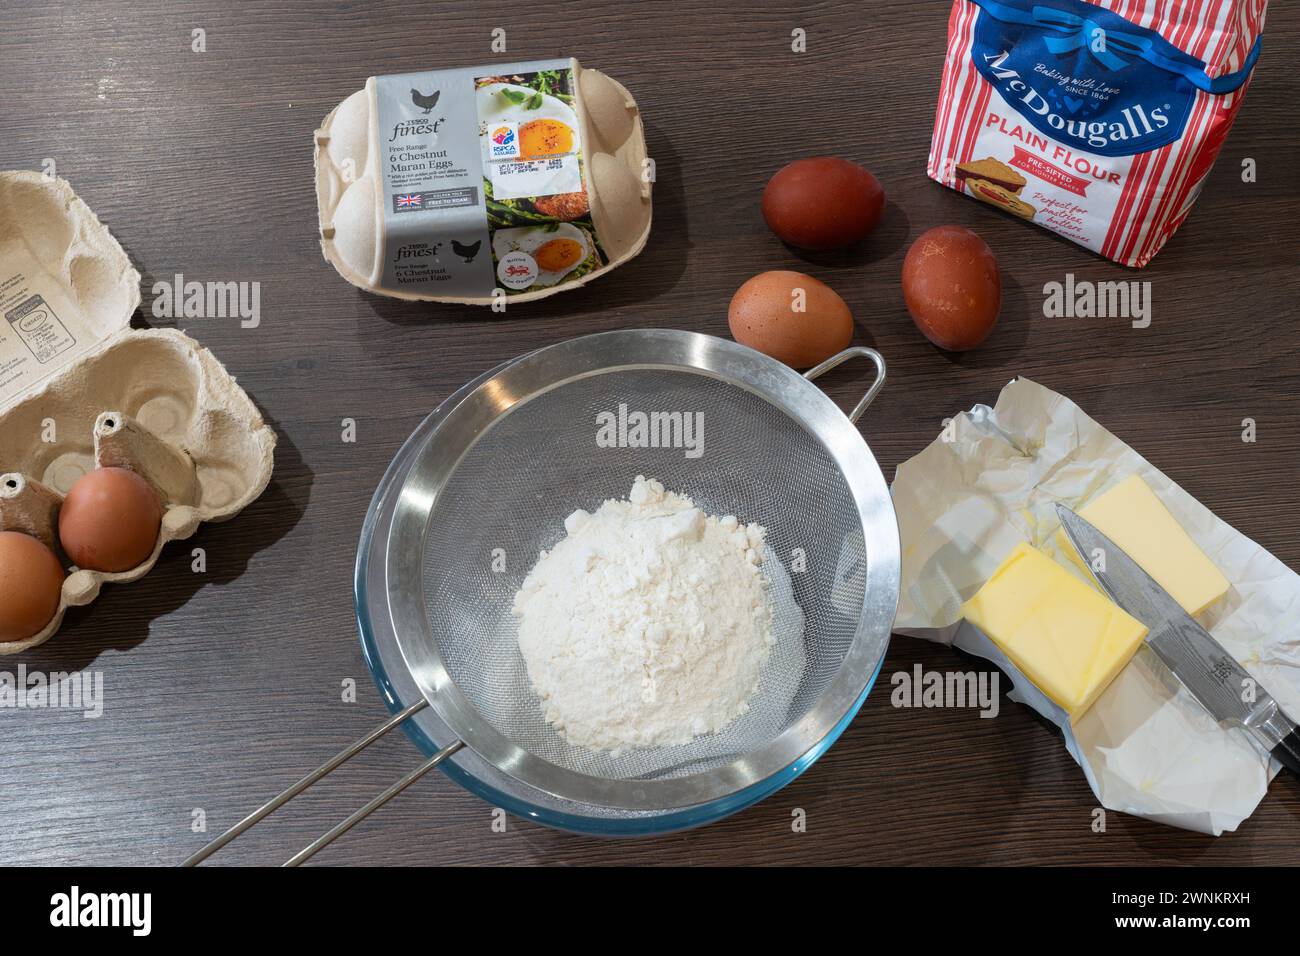 Ingredients for baking a cake on a kitchen worktop - butter, eggs and flour in a sieve for sifting. UK Stock Photo